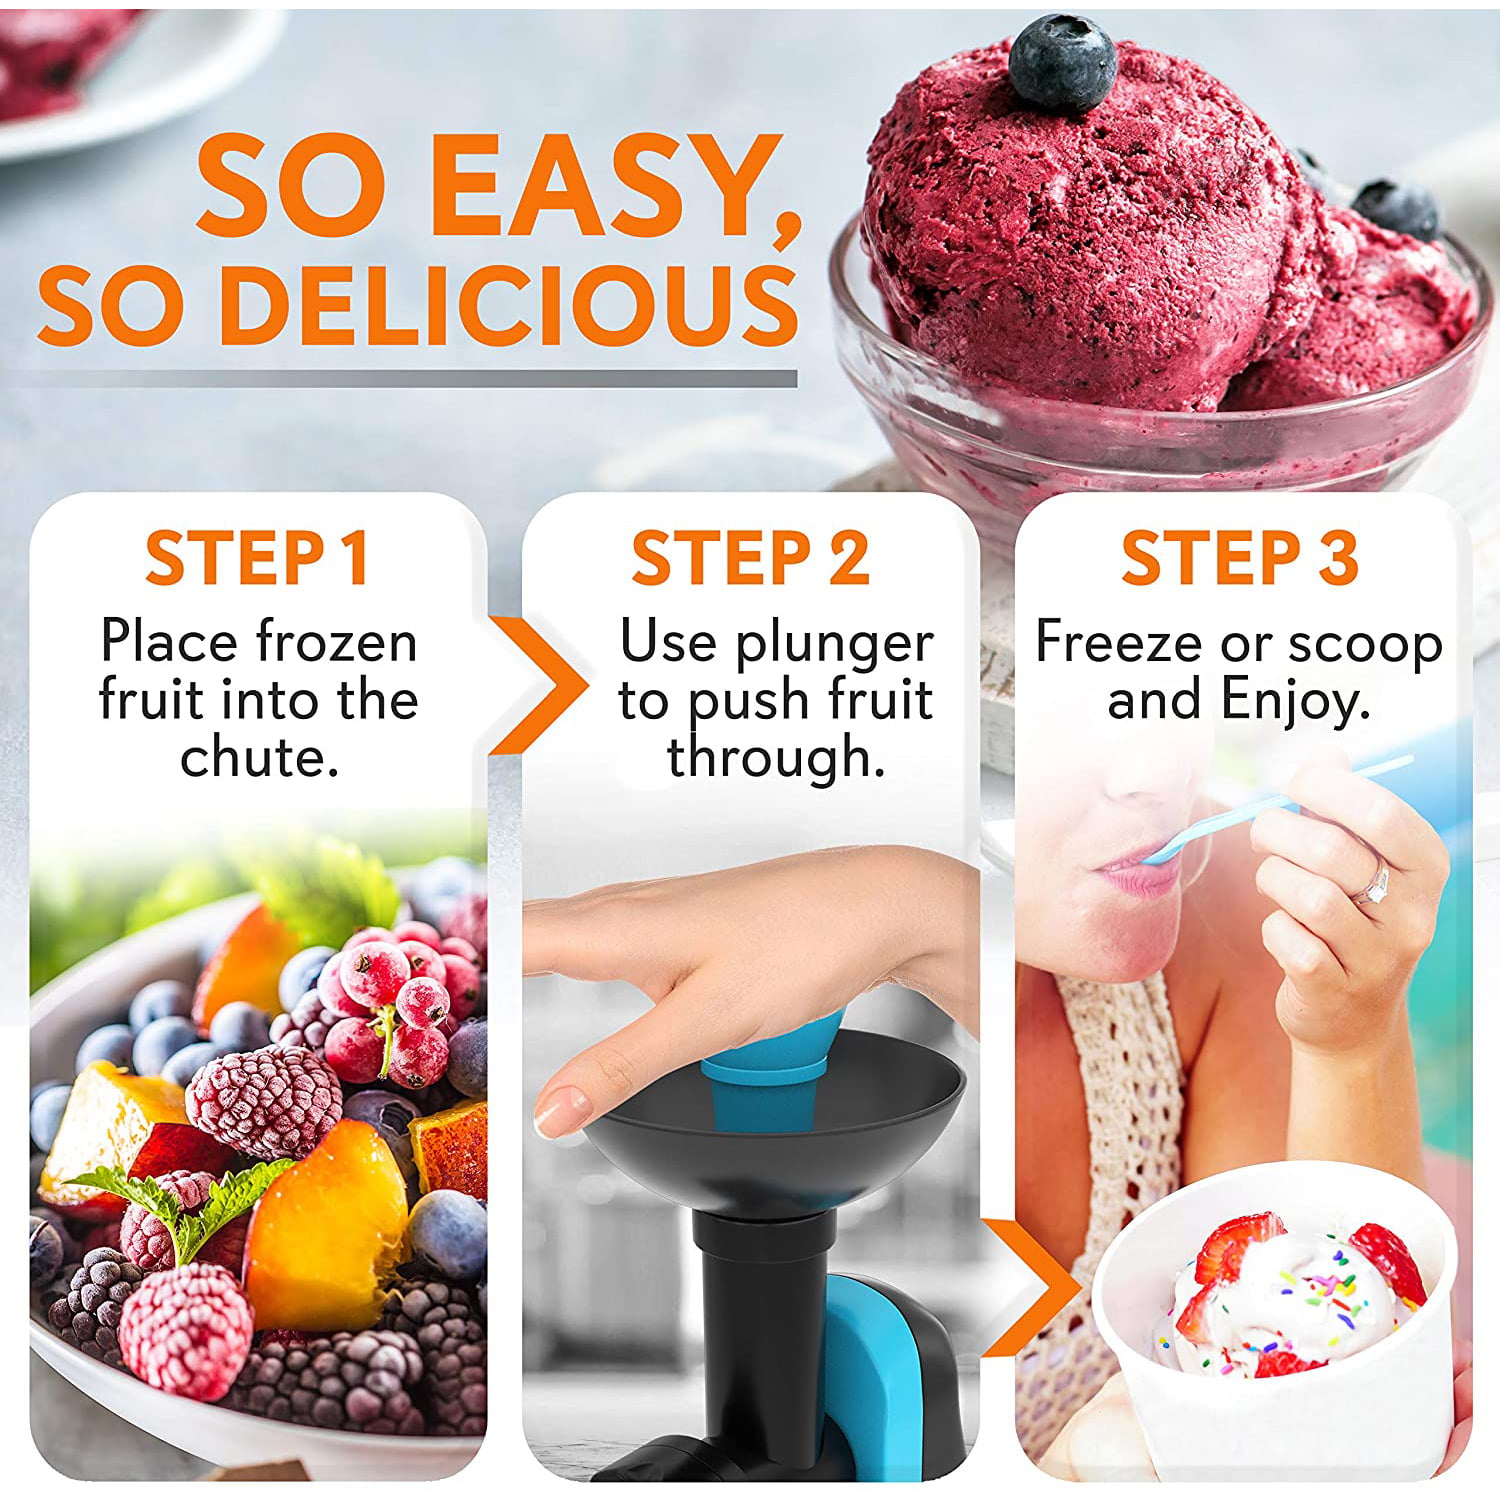 This Best-Selling Ice Cream Maker Turns Frozen Fruit into Soft Serve